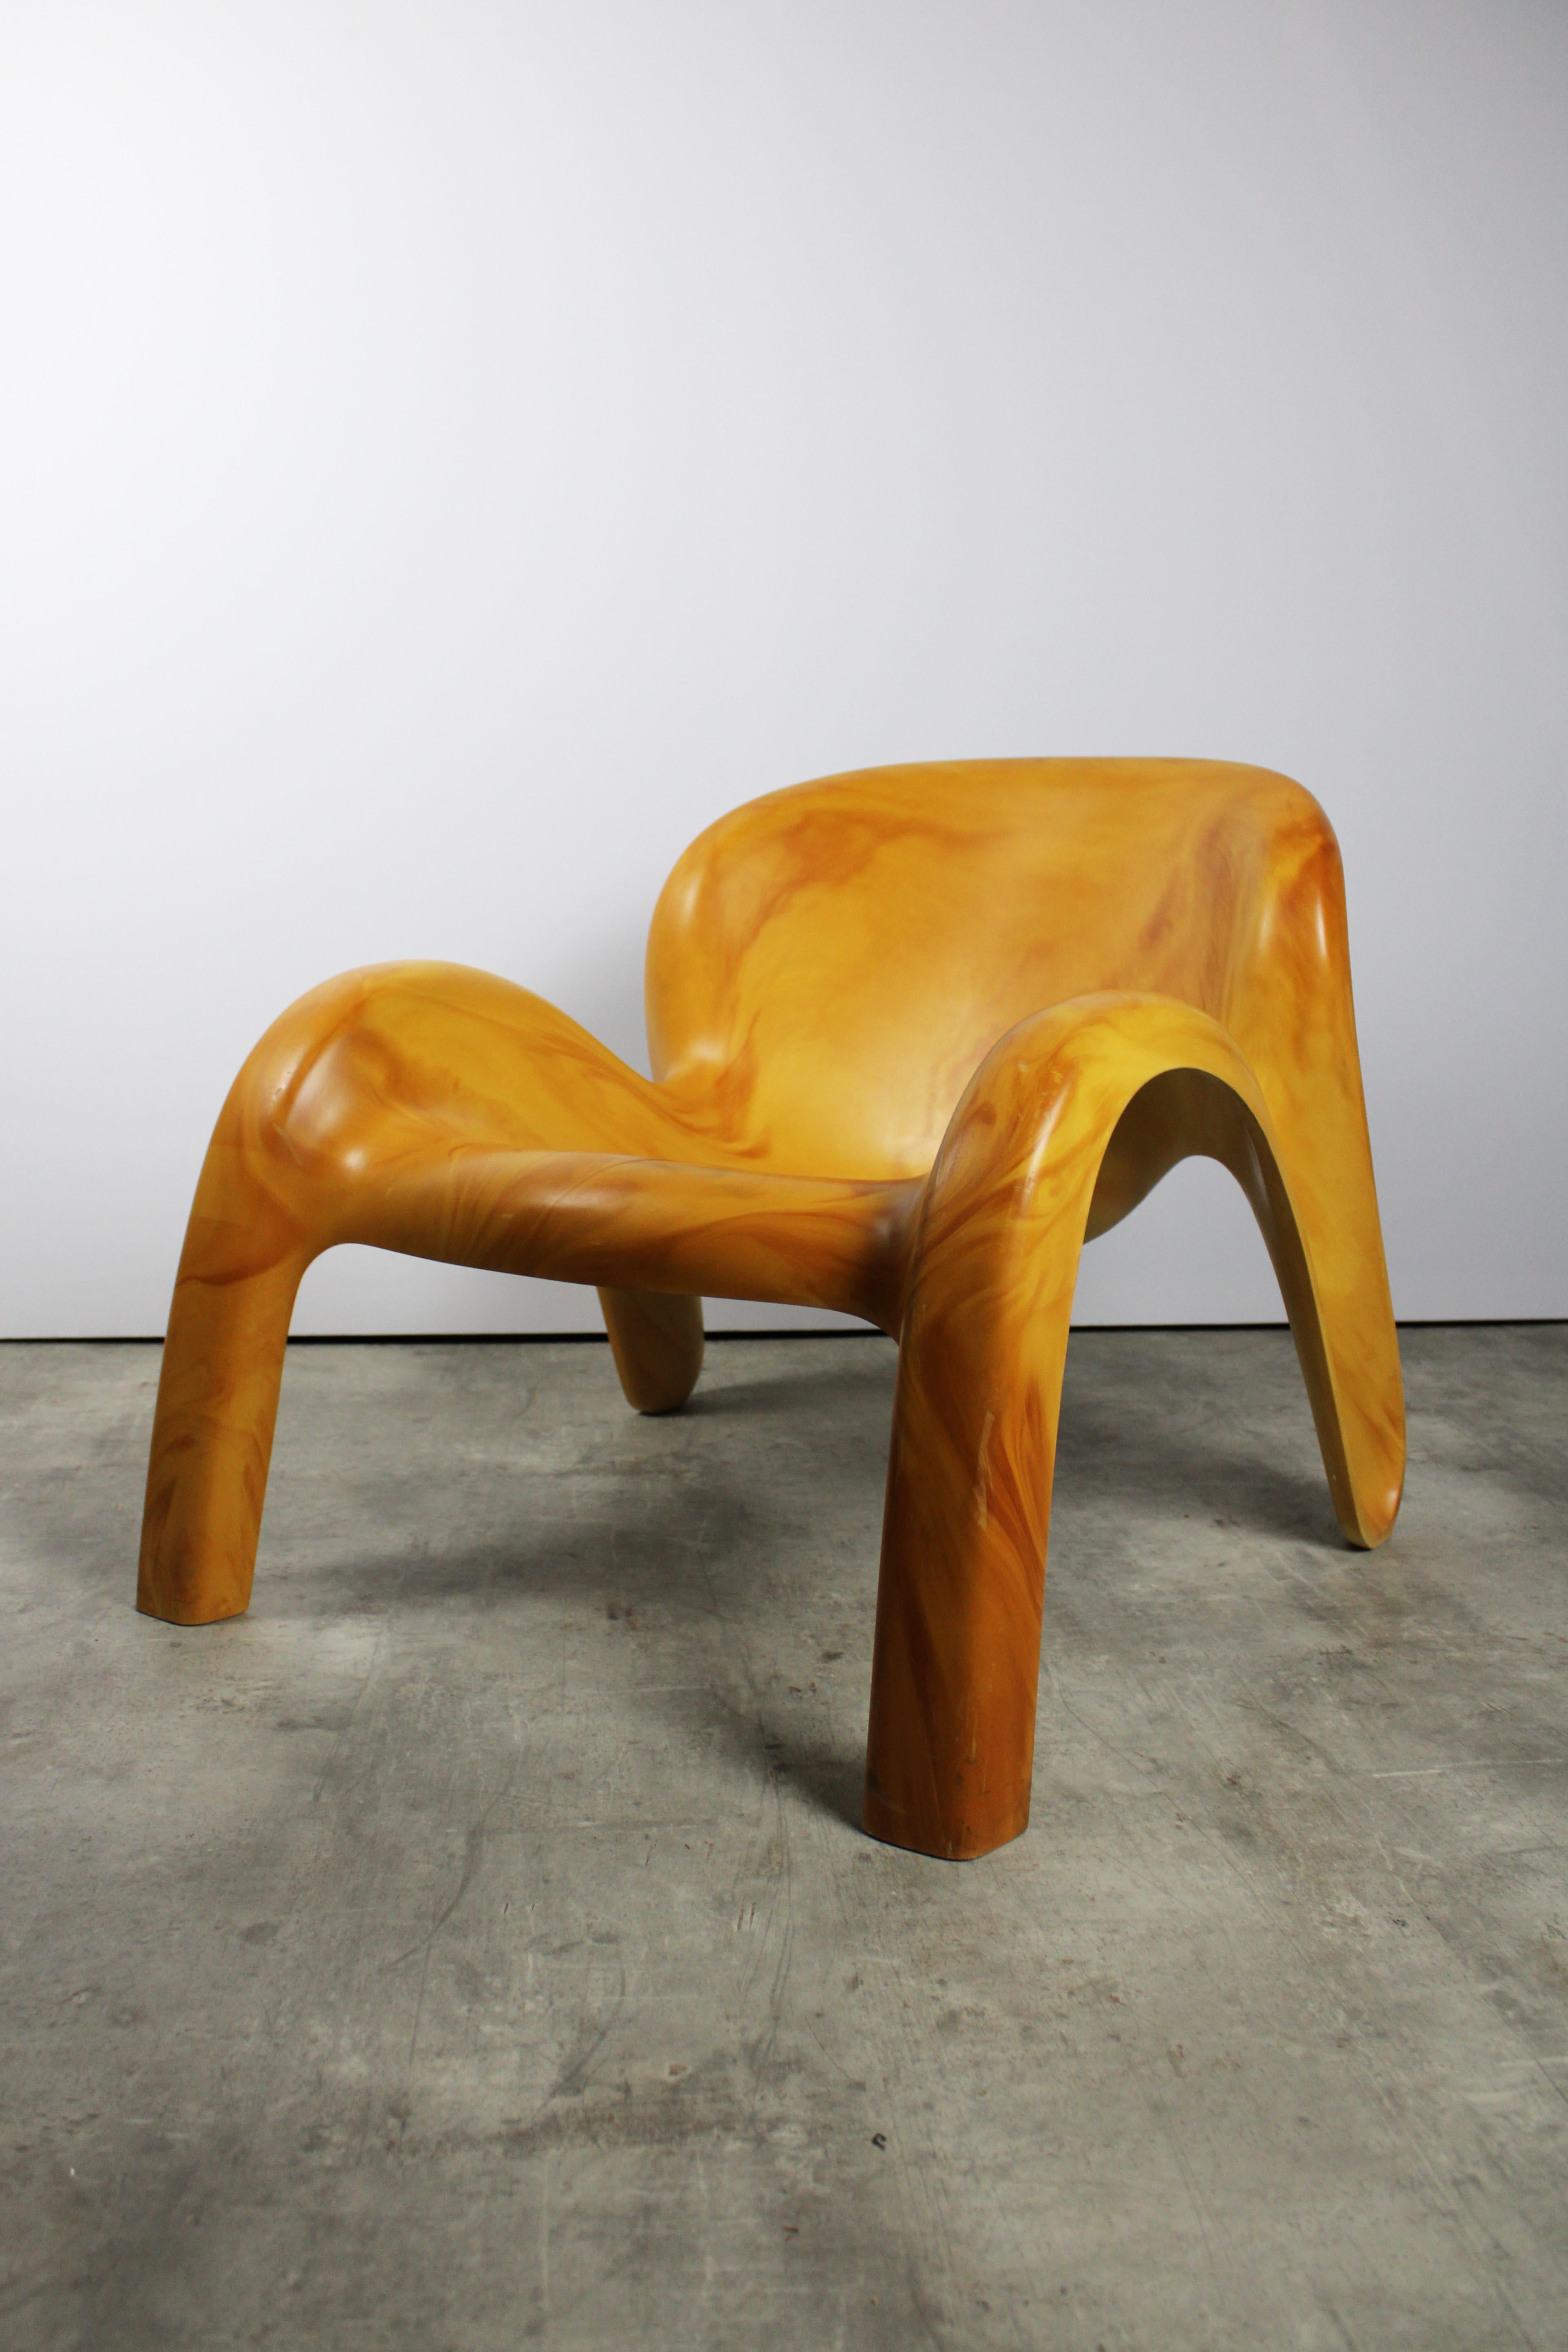 Peter Ghyczy's GN2 garden chair stands as one of his most celebrated design masterpieces. This particular version, adorned in a distinctive Ochre yellow, is a limited edition with only a handful ever created, rendering it an elusive find. Crafted in